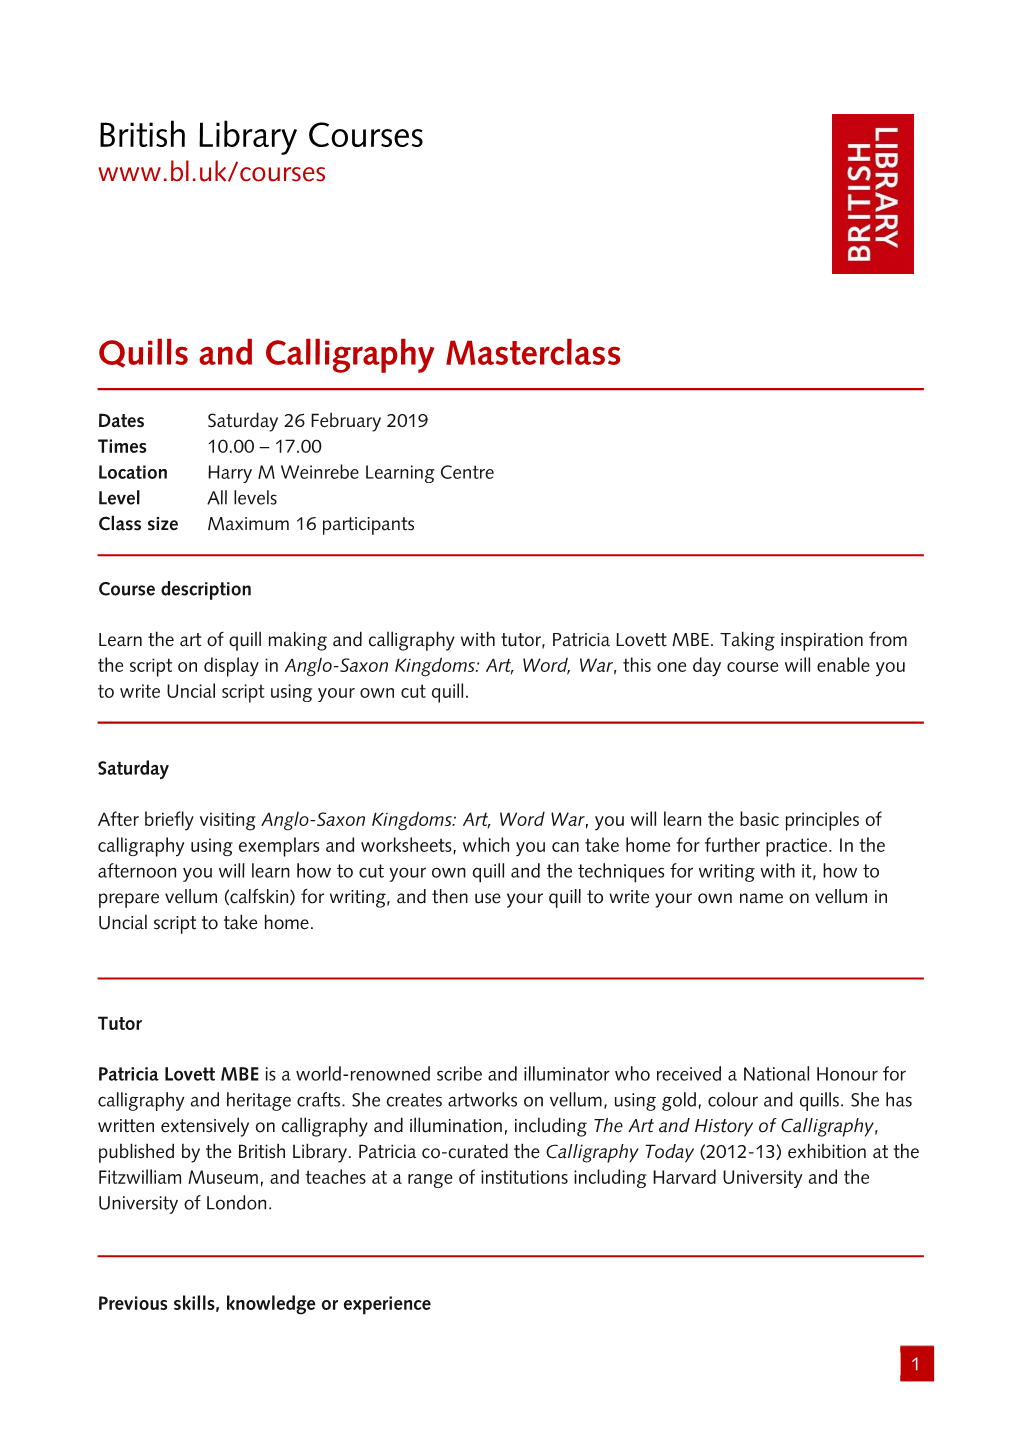 British Library Courses Quills and Calligraphy Masterclass